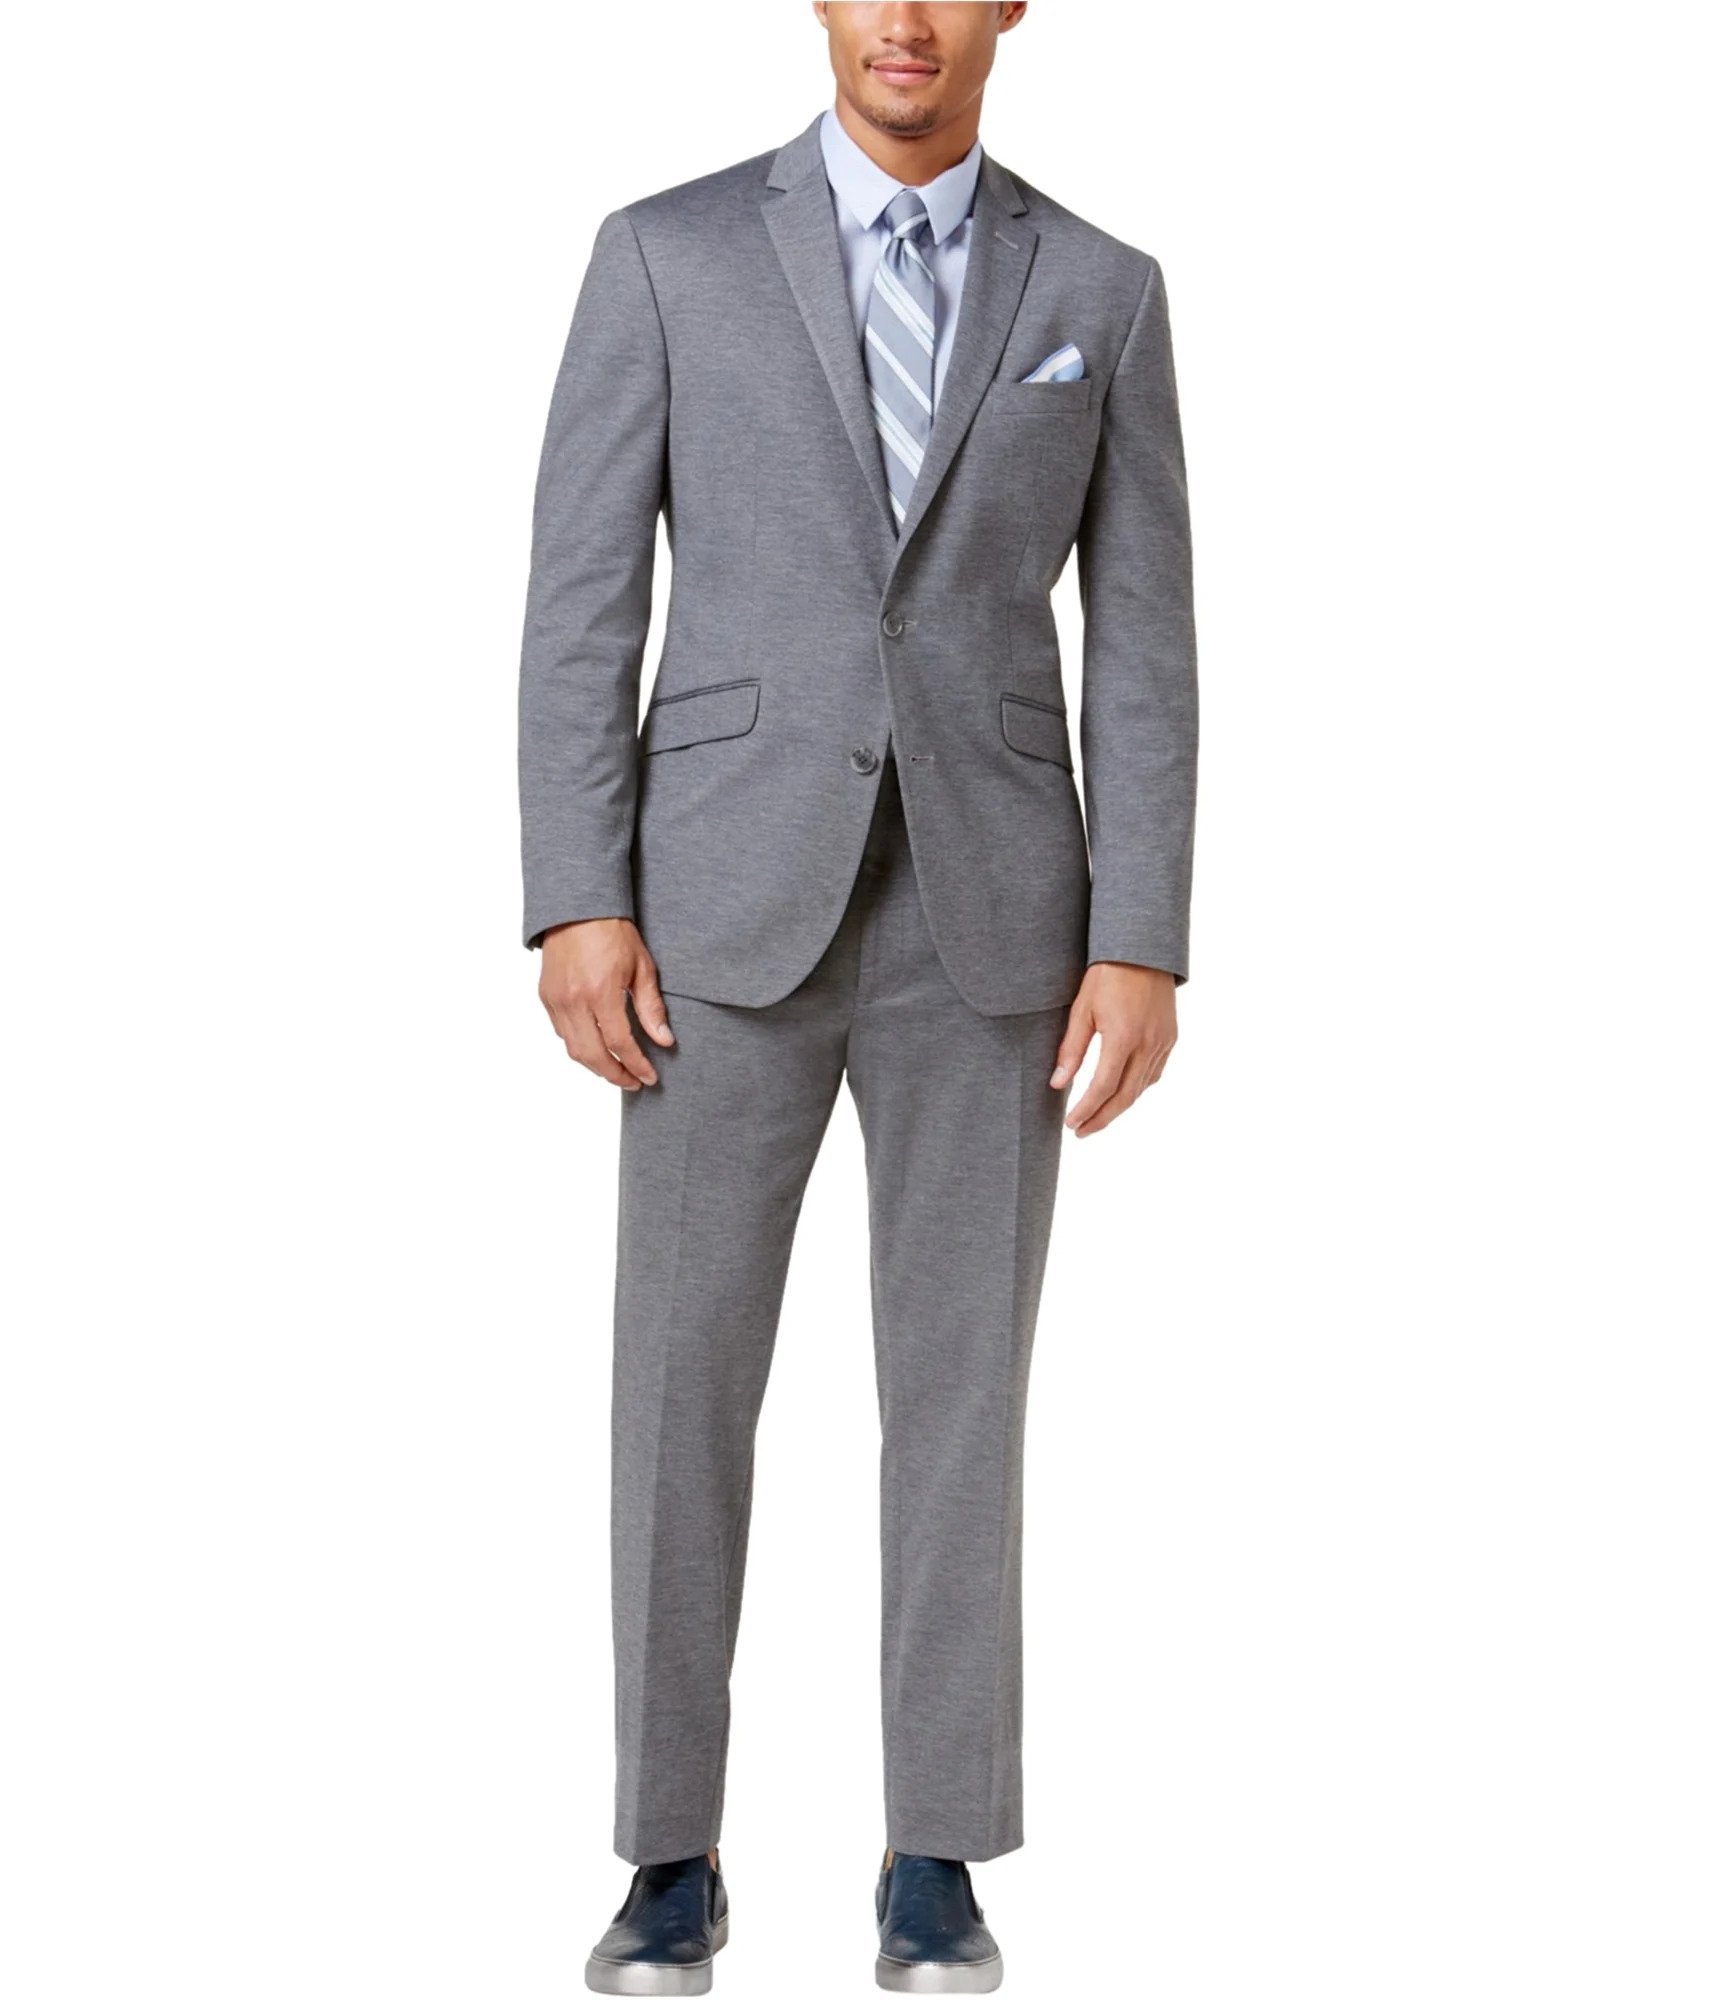 Why Kenneth Cole's Tuxedos Are Perfect For Weddings, Galas, And Other ...